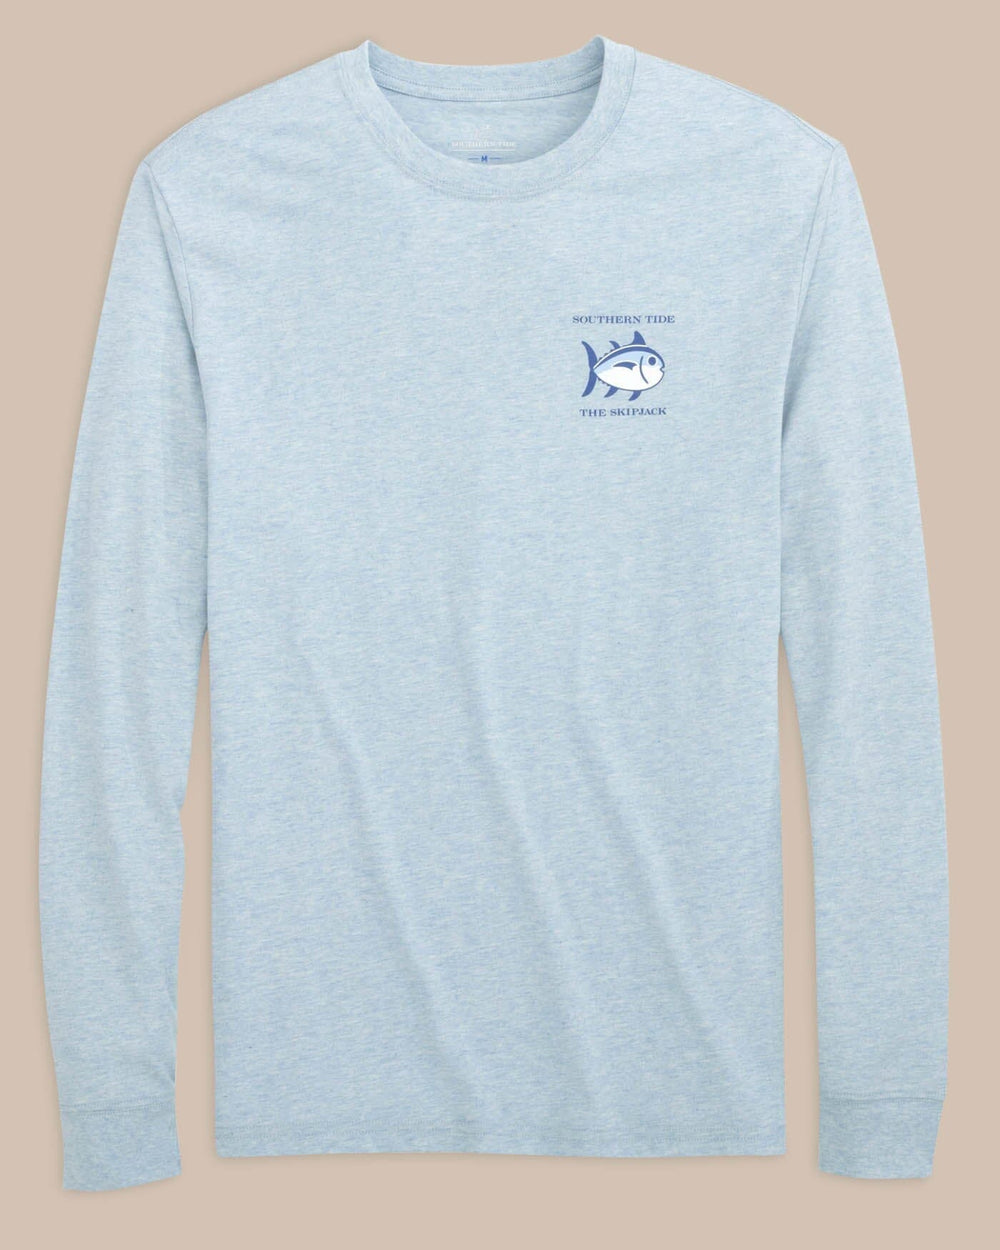 The front view of the Southern Tide Heather Original Skipjack Long Sleeve T-shirt by Southern Tide - Heather Dream Blue